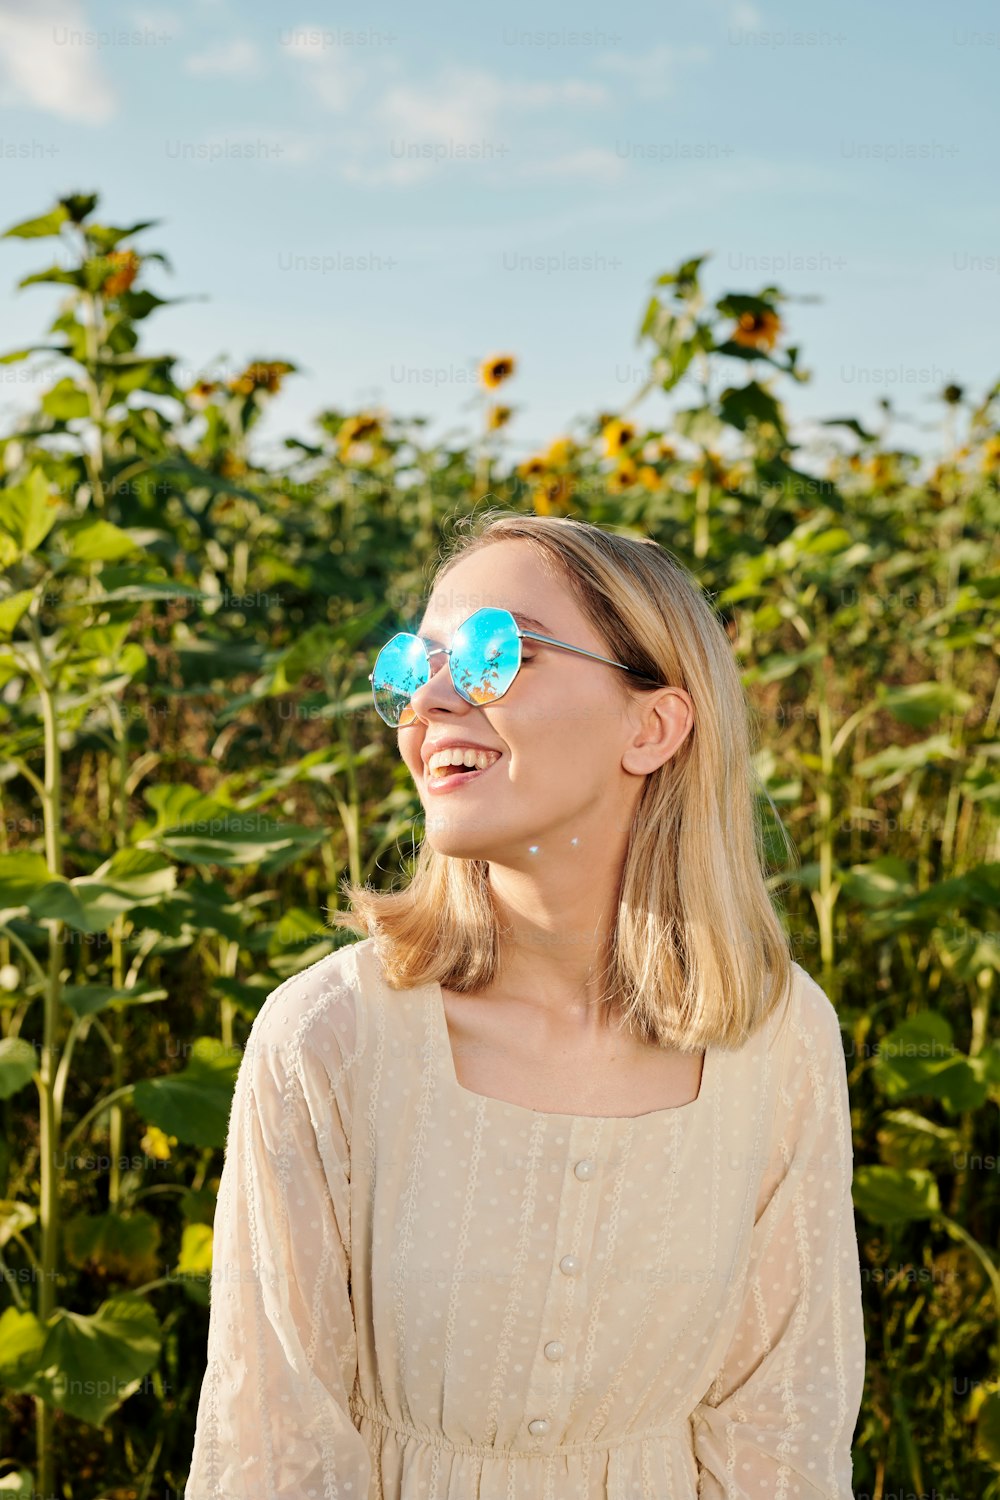 Joyful young blond woman in sunglasses and white dress standing against sunflower field in front of camera with blue sky on background